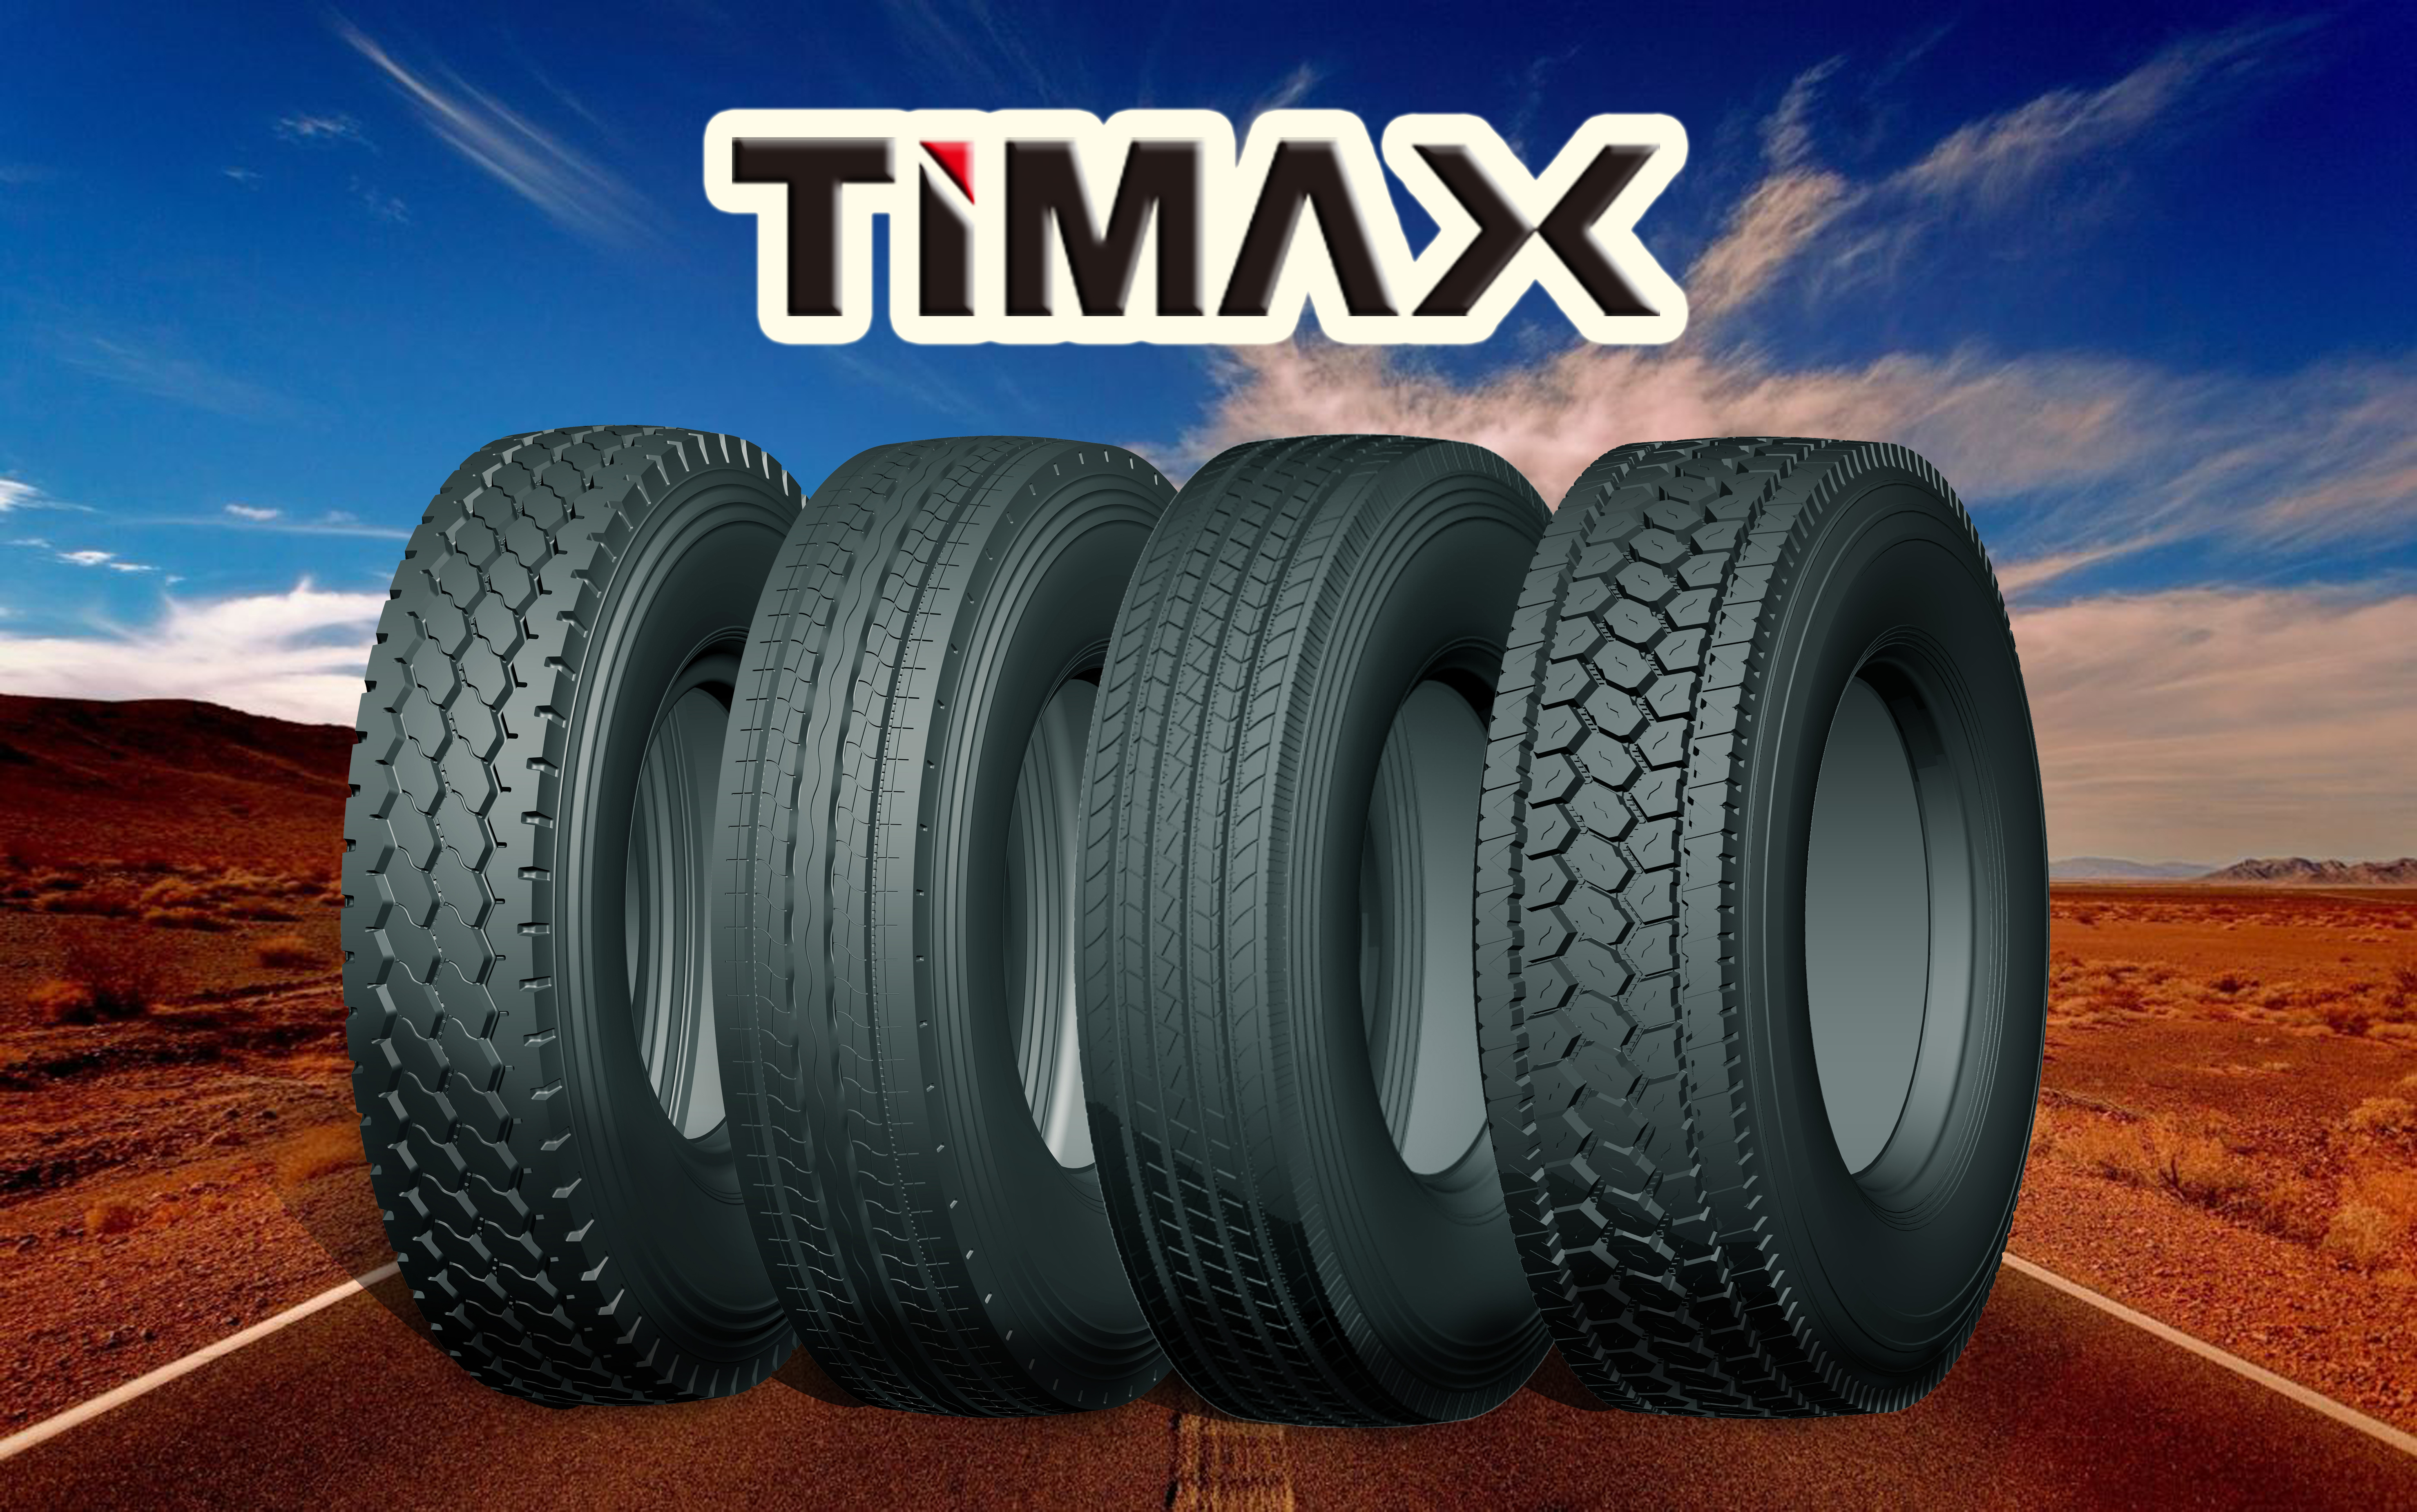 5 Ways to Extend Tanco Tire Life and Improve Fuel Economy